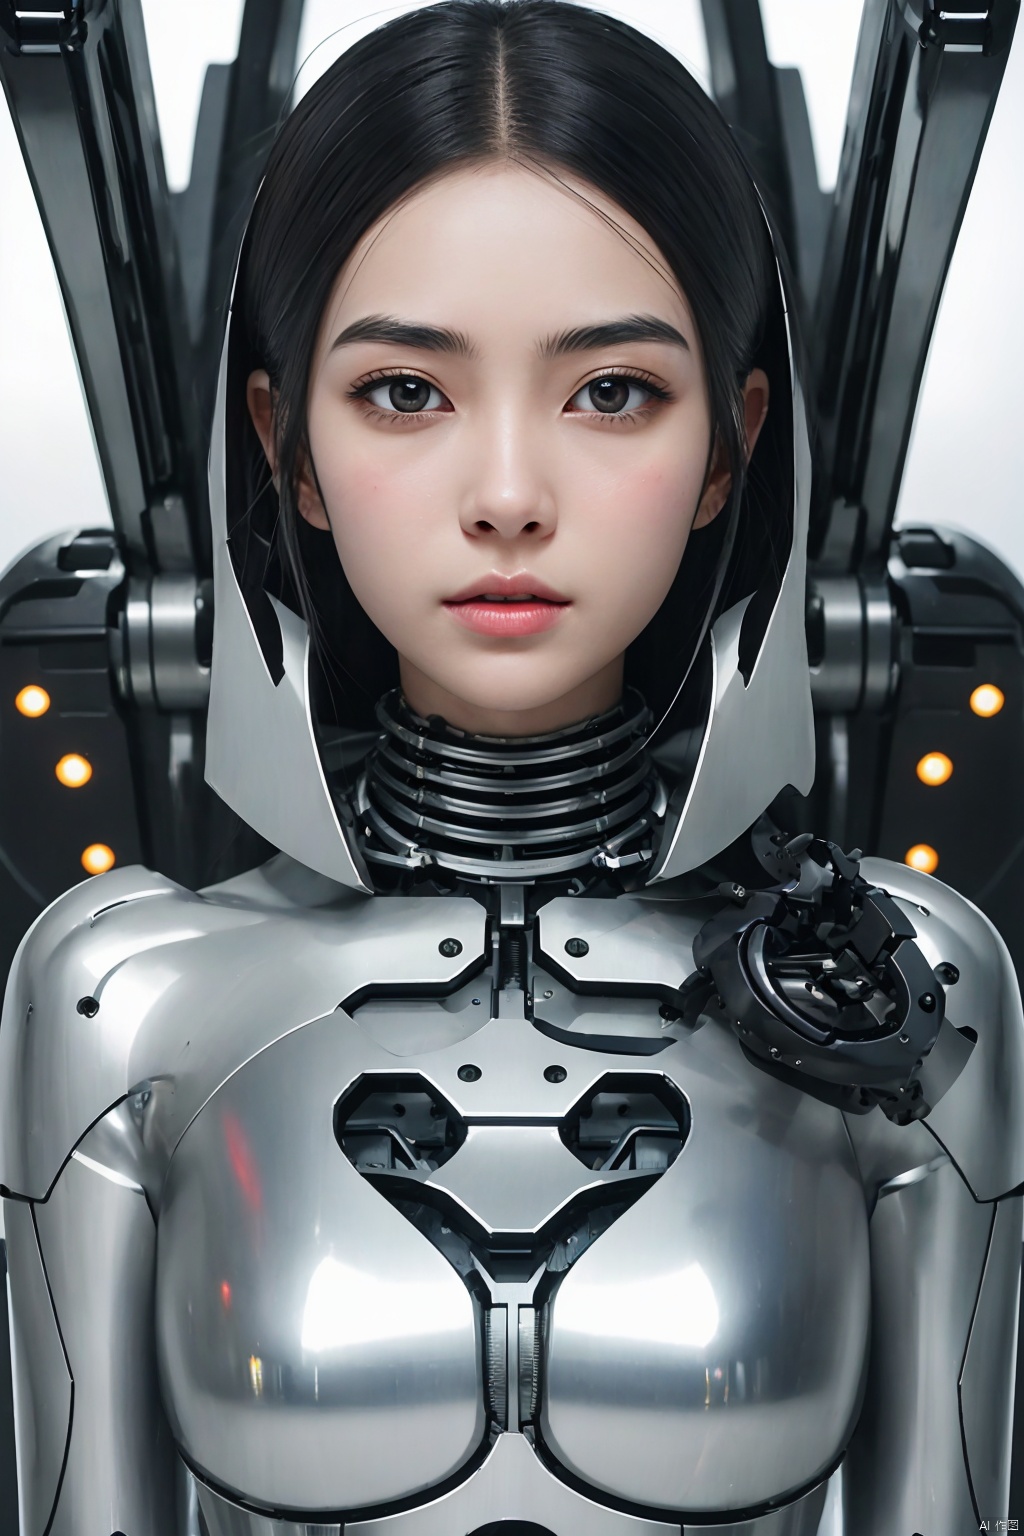  Masterpiece, Best Quality, 1 Mechanical Girl, Detailed Face, Shadow, 8k, Ultra Sharp, Metal, Complex, Ornament Detail, Electroplated Metallic Paint, Egyptian Detail, Highly Complex Detail, Rendered on cgSocial, Face Camera, Mechanical Limb, Mechanical Cervical Attached to the Neck, Wires and Cables Connecting the Head, Killing Machine, Ghost in a Shell, ((Anime Art Style)), Electroplating paint,真实